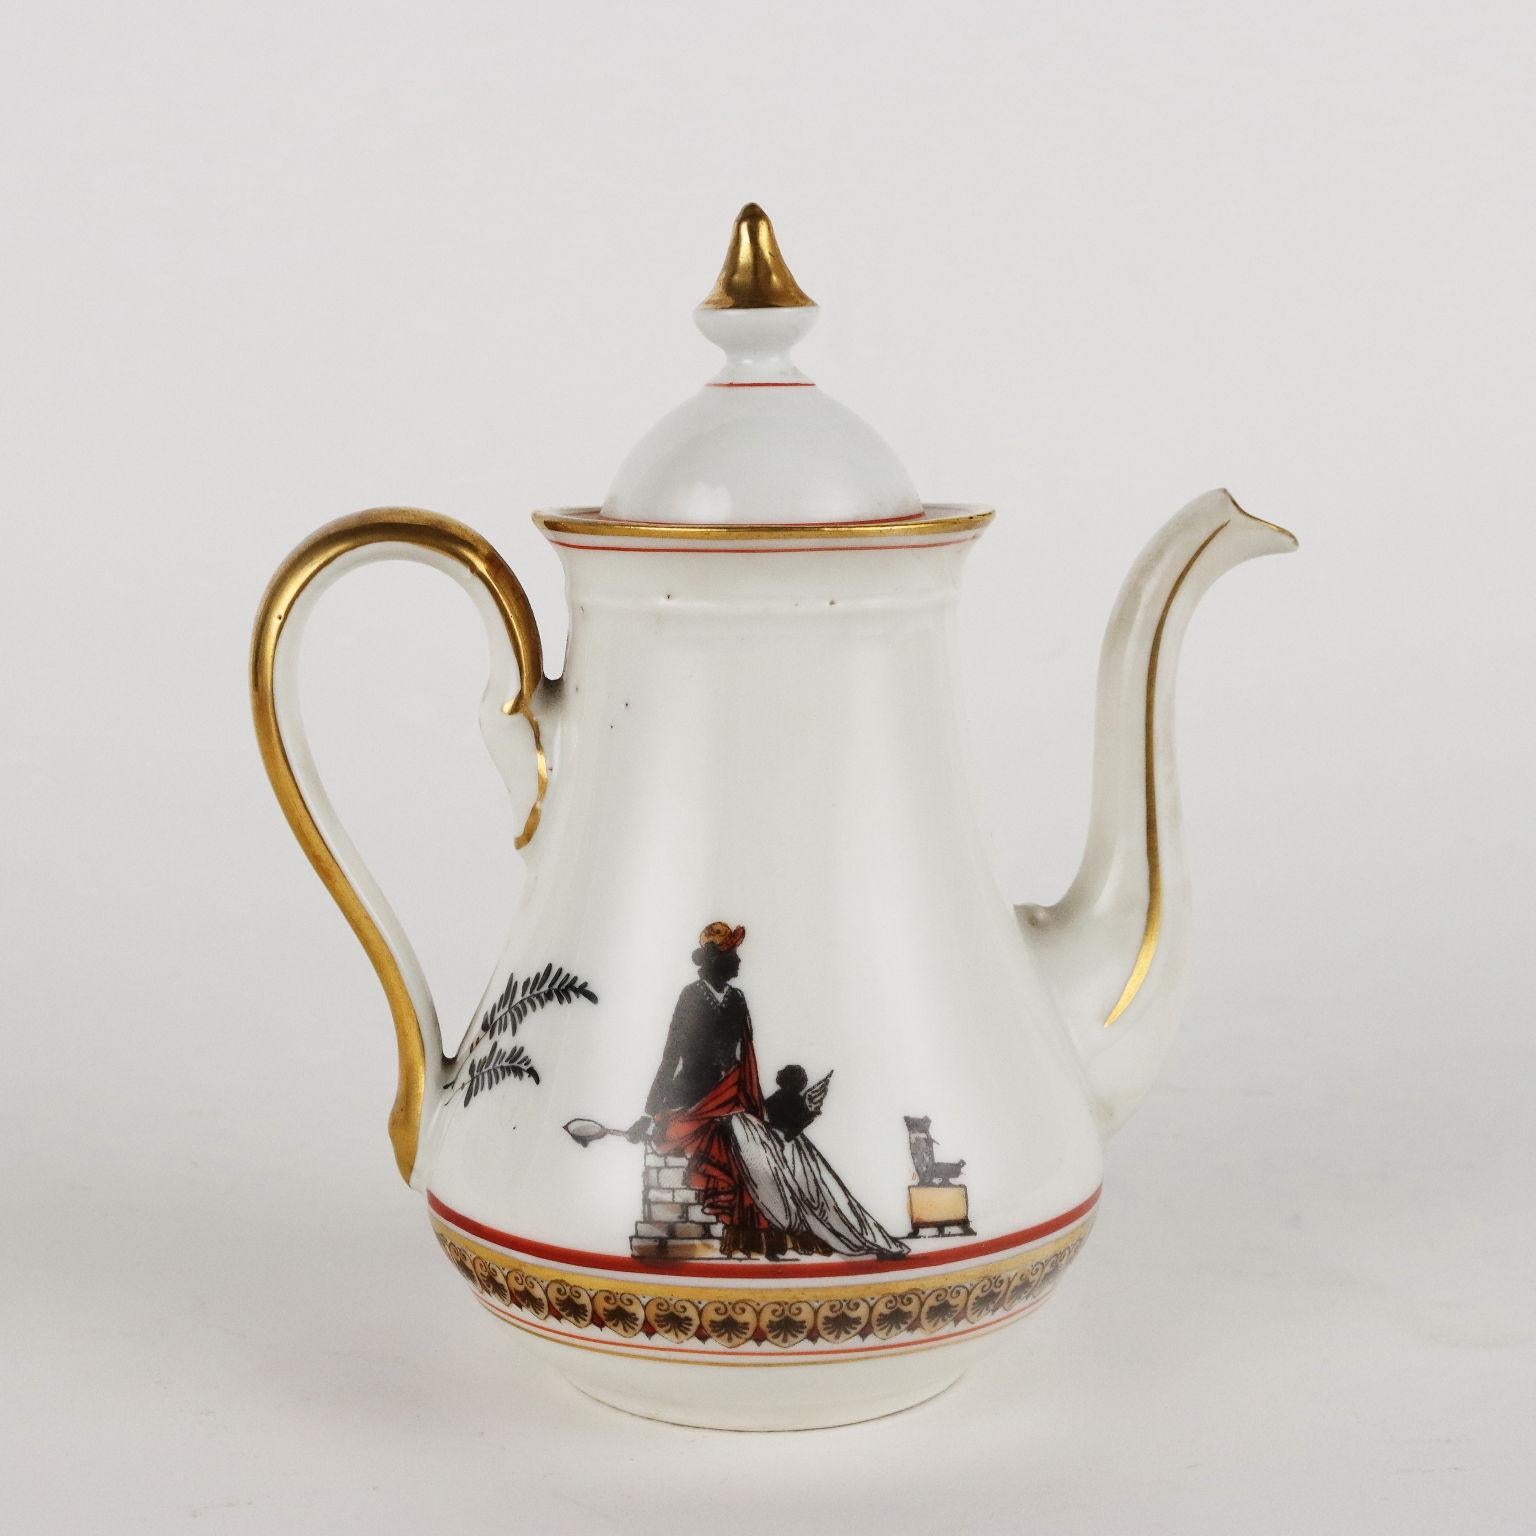 Italian Tete a Tete service in Porcelain by Ginori - Italy ca. 1880. For Sale